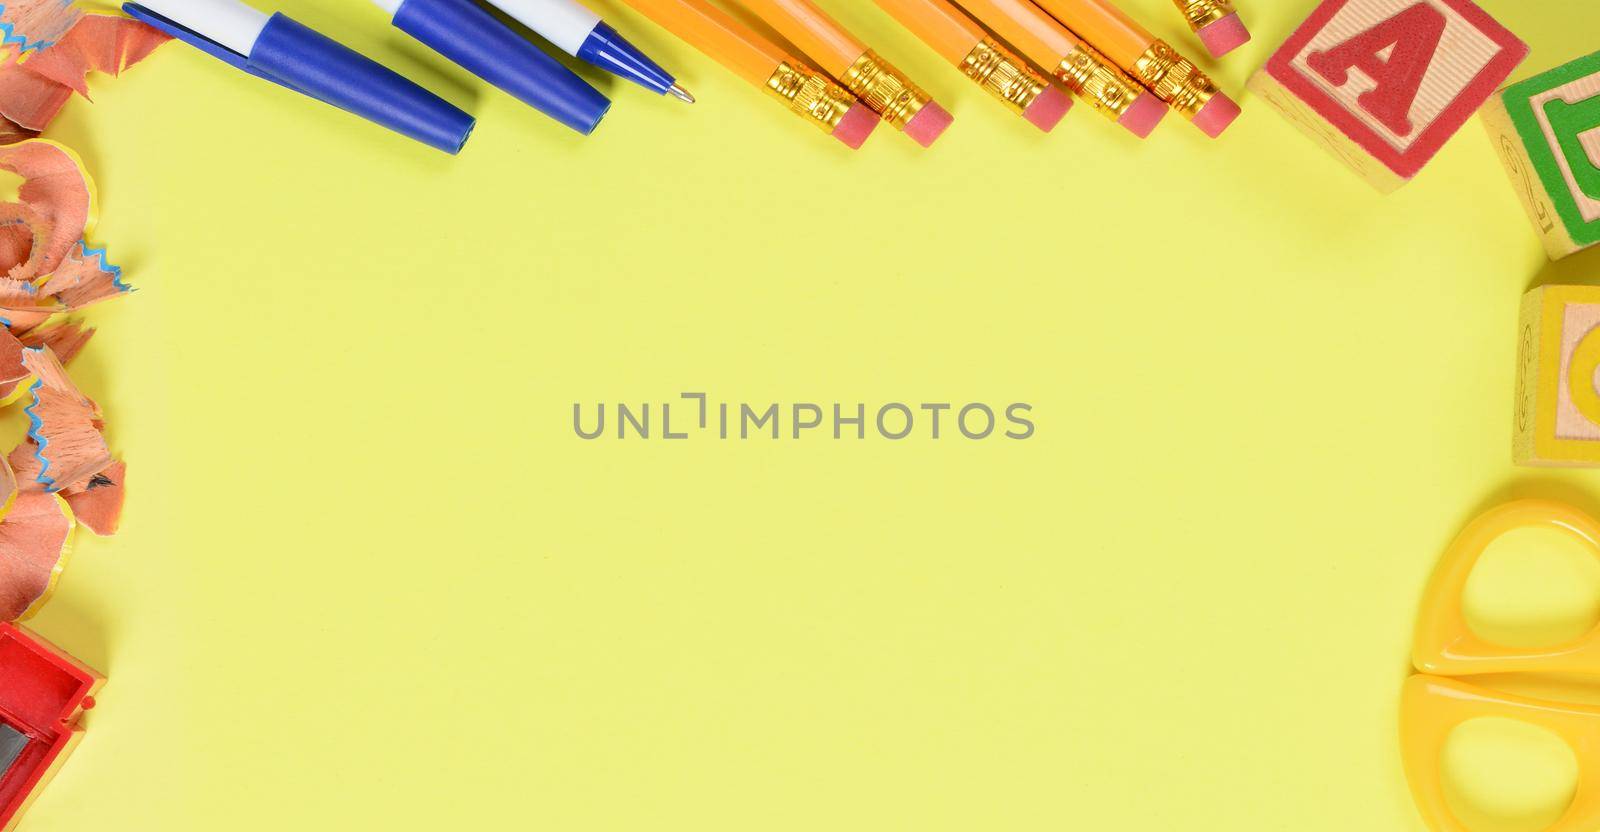 Back to school concept: School supplies on a yellow background by sCukrov